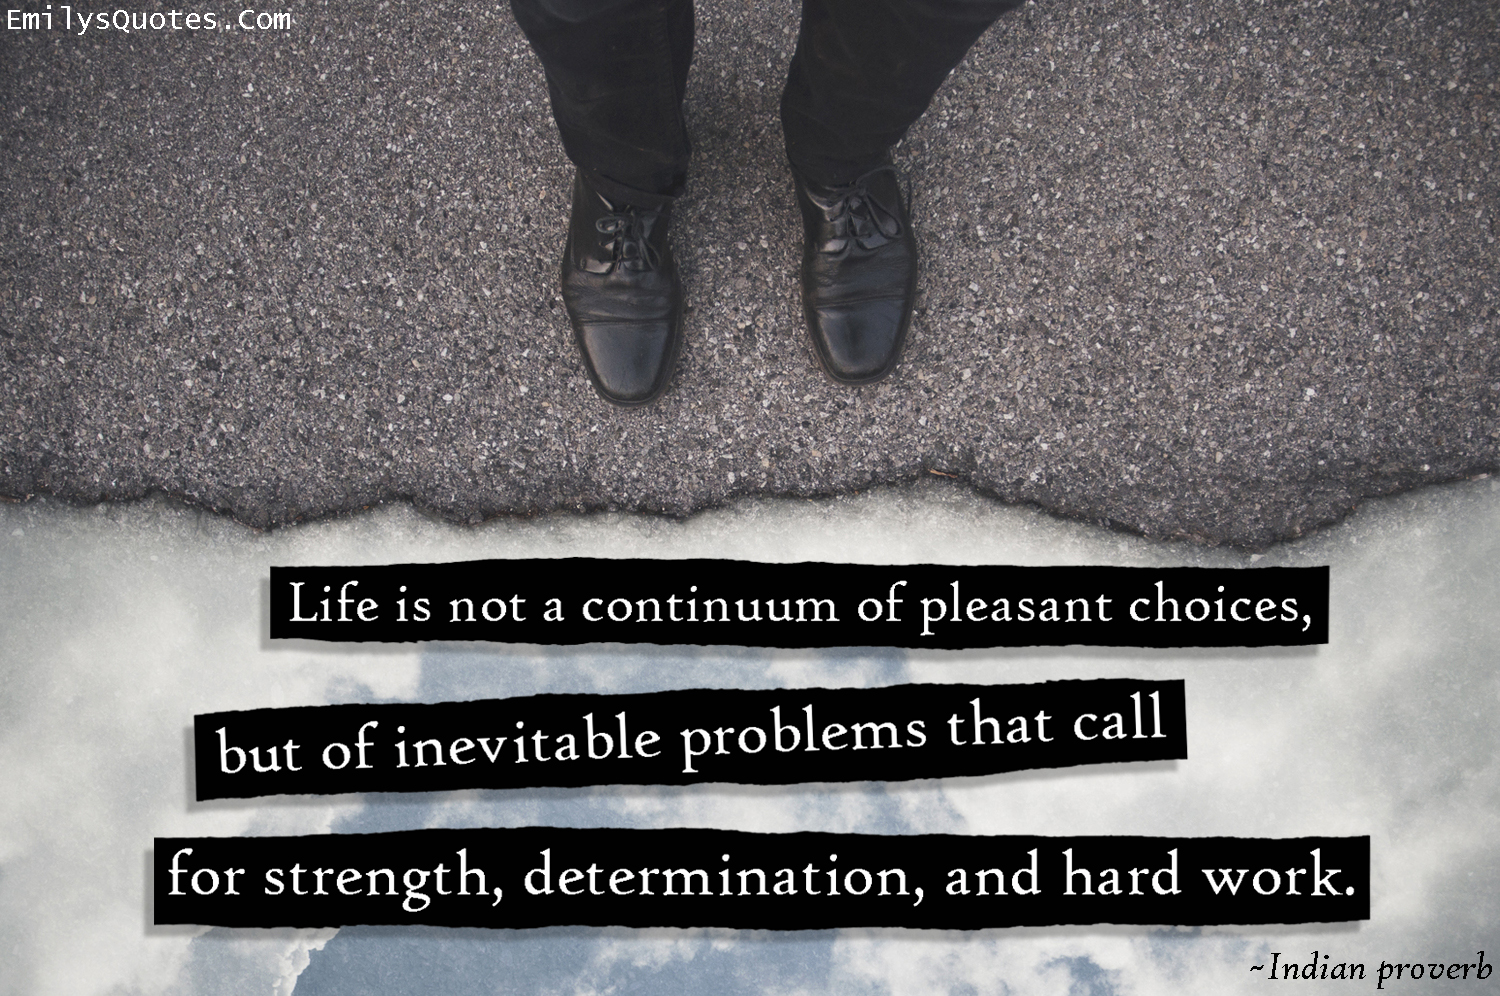 Life is not a continuum of pleasant choices, but of inevitable problems that call for strength, determination, and hard work